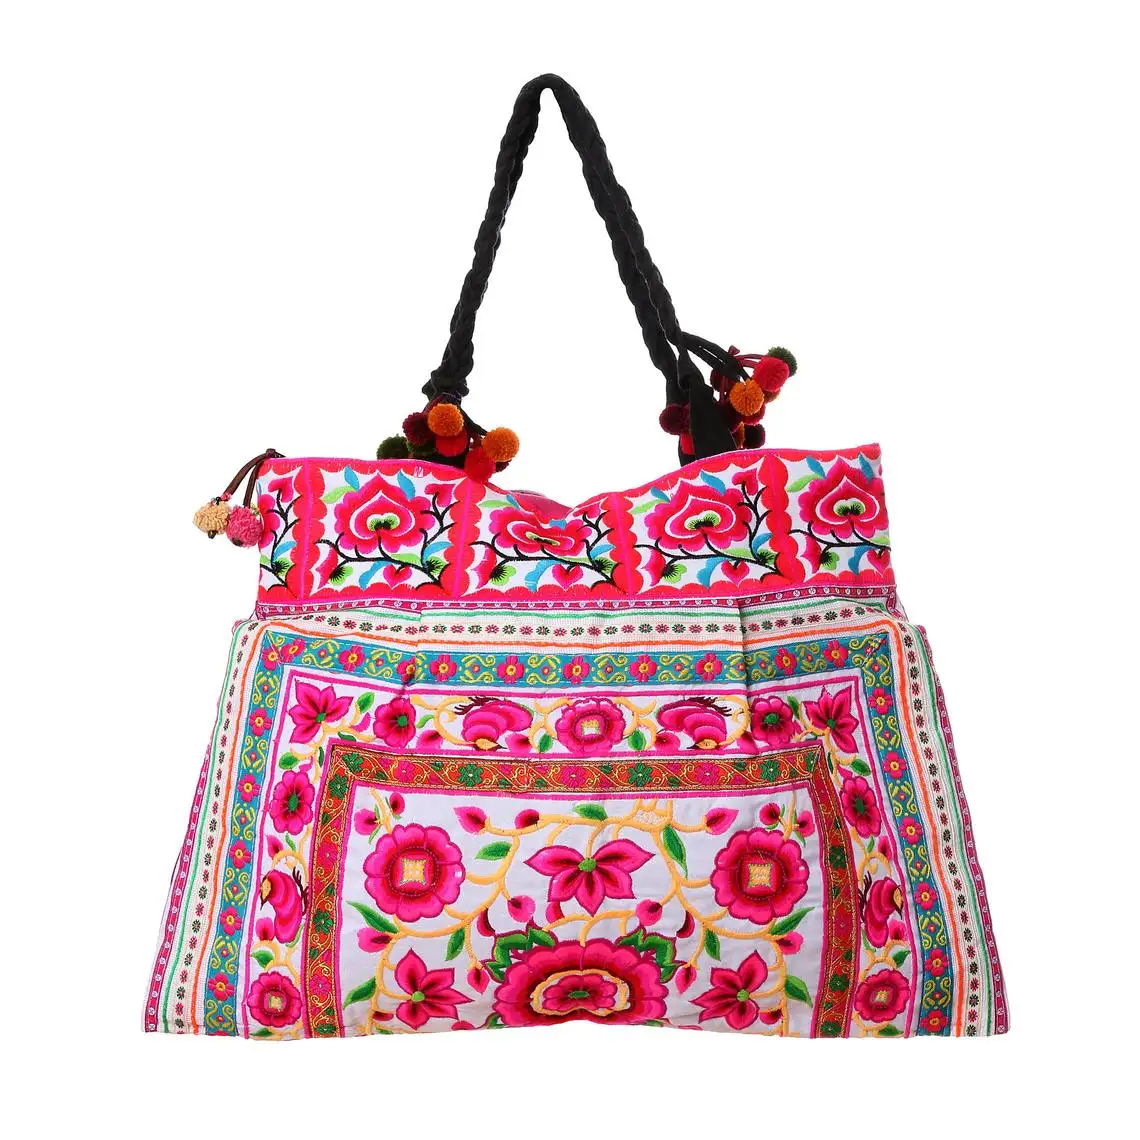 Flower Multi Bird Hmong Tribes Embroidered Bohemian Beach Tote Bag for Women Boho Hippie Tote Bag